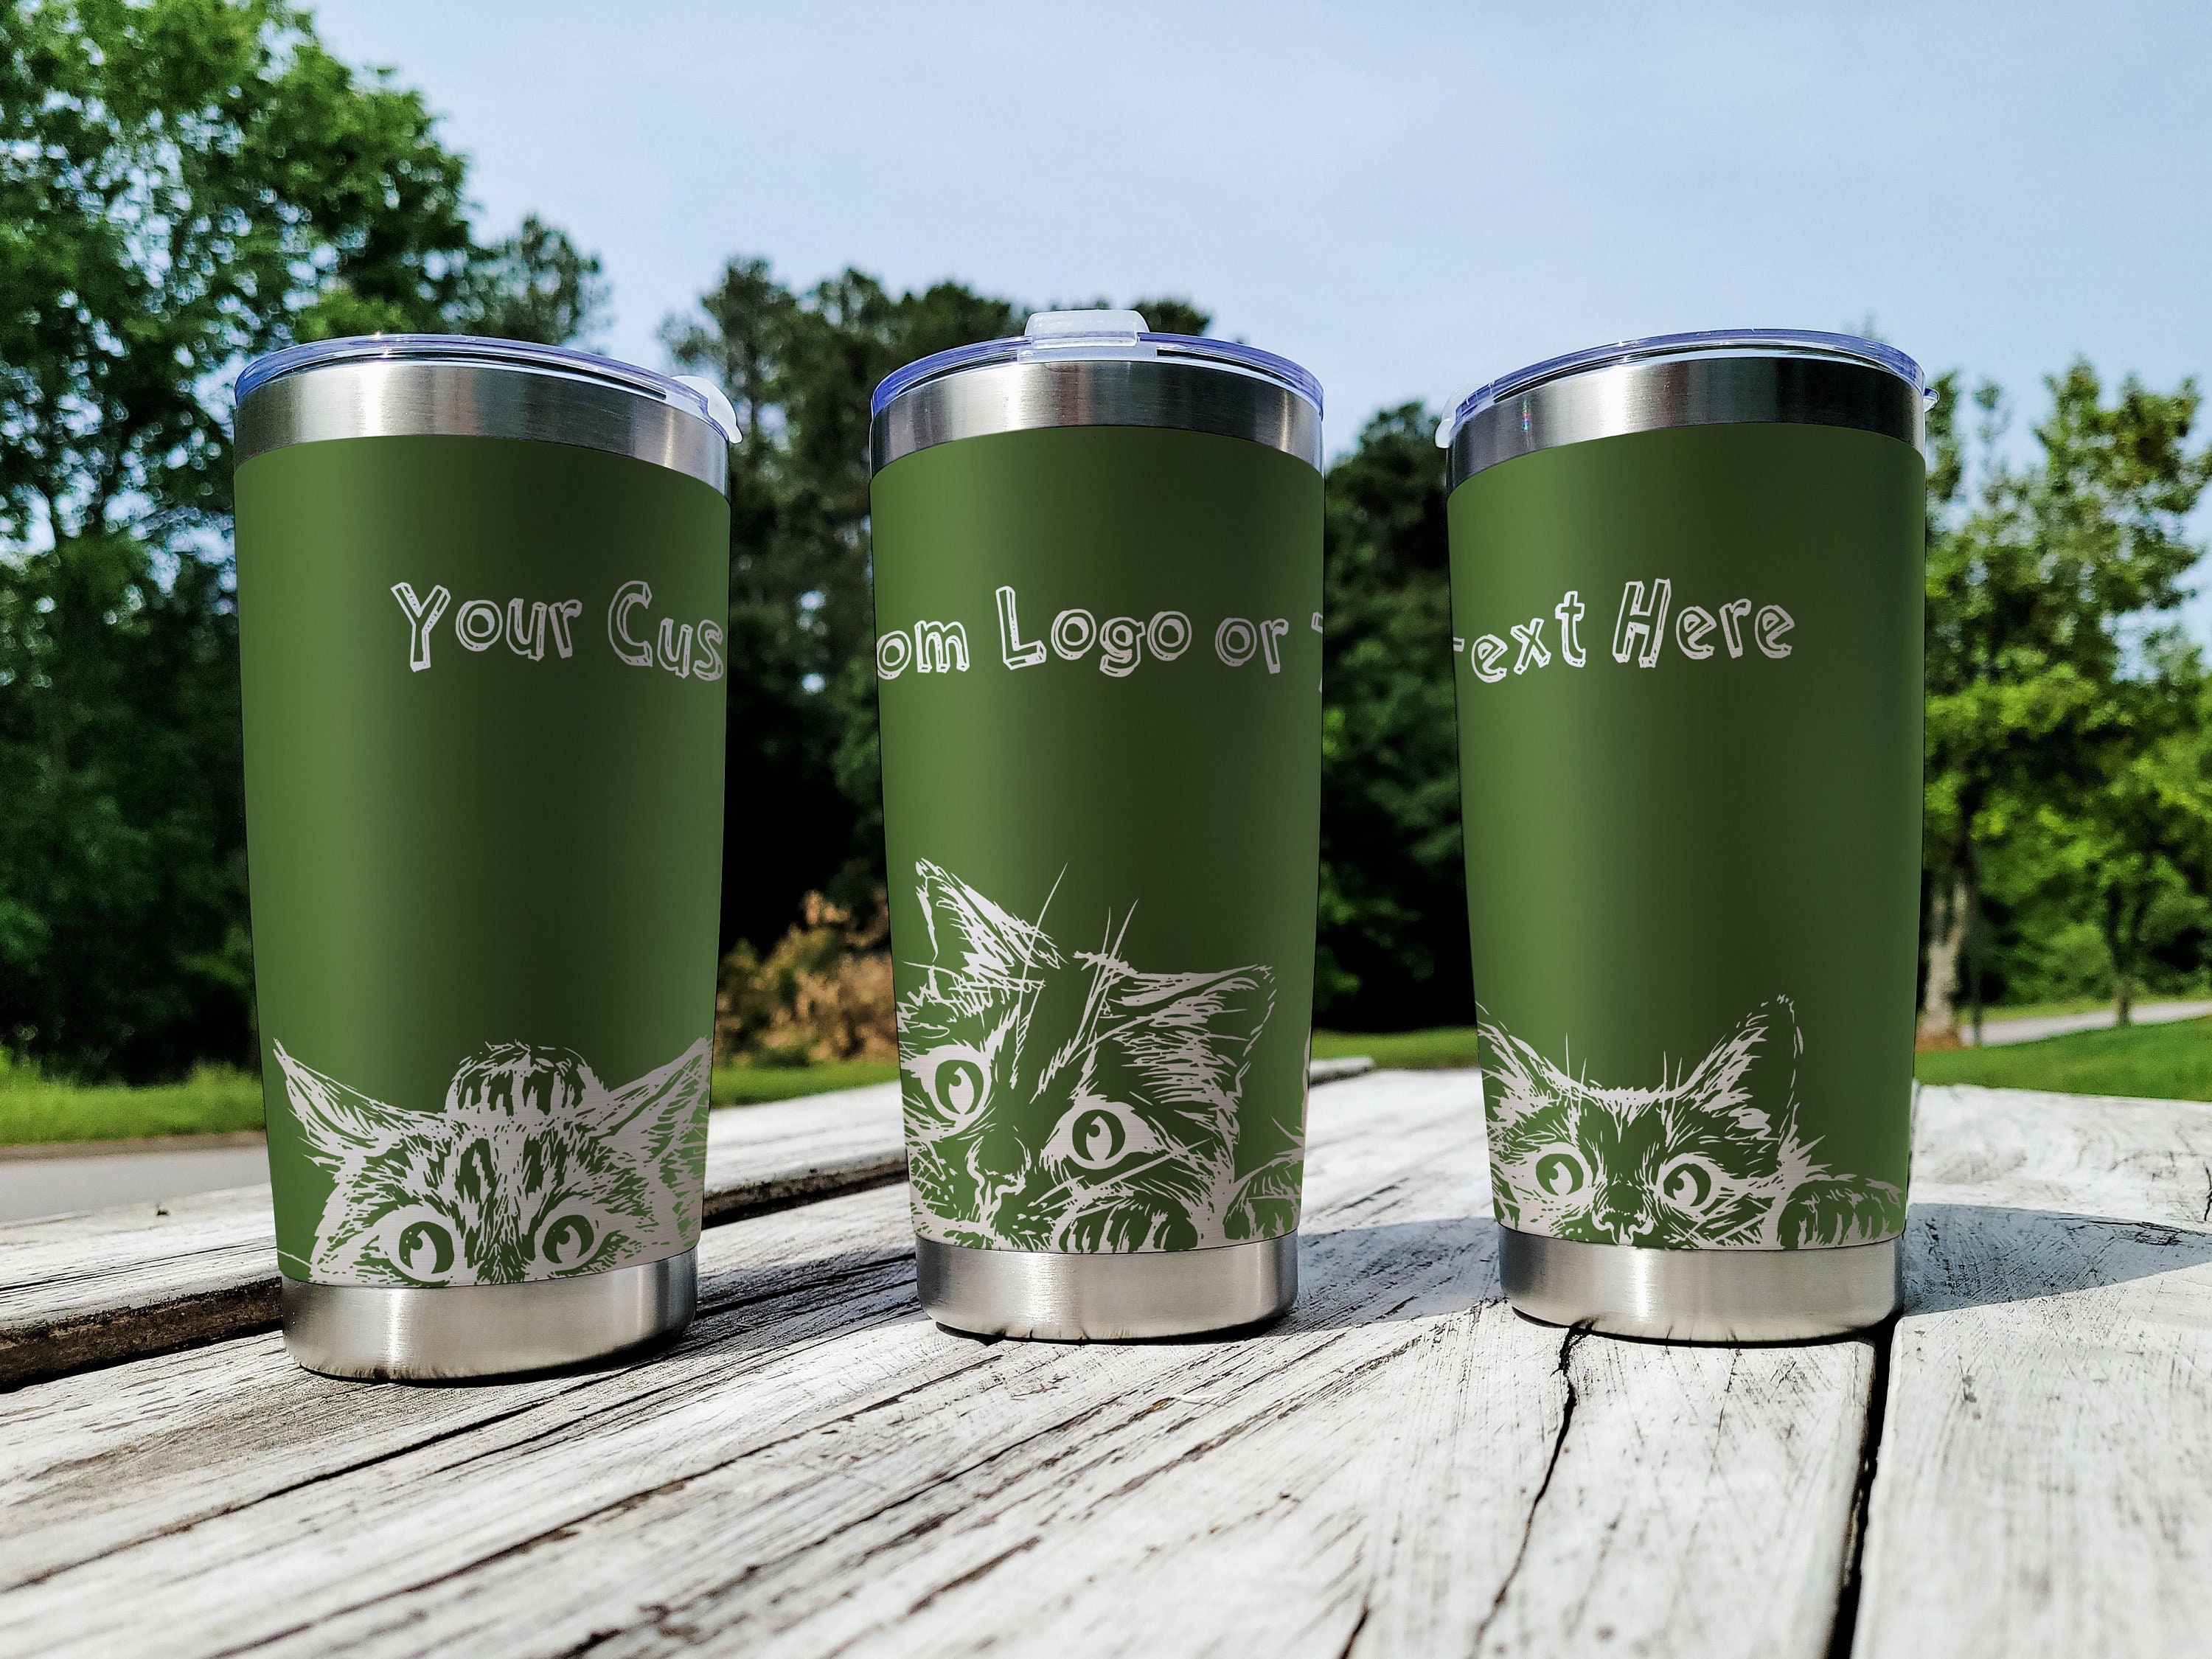 Gulo Shop New Arrival Yeti Stainless Steel Cup Yeti Rambler